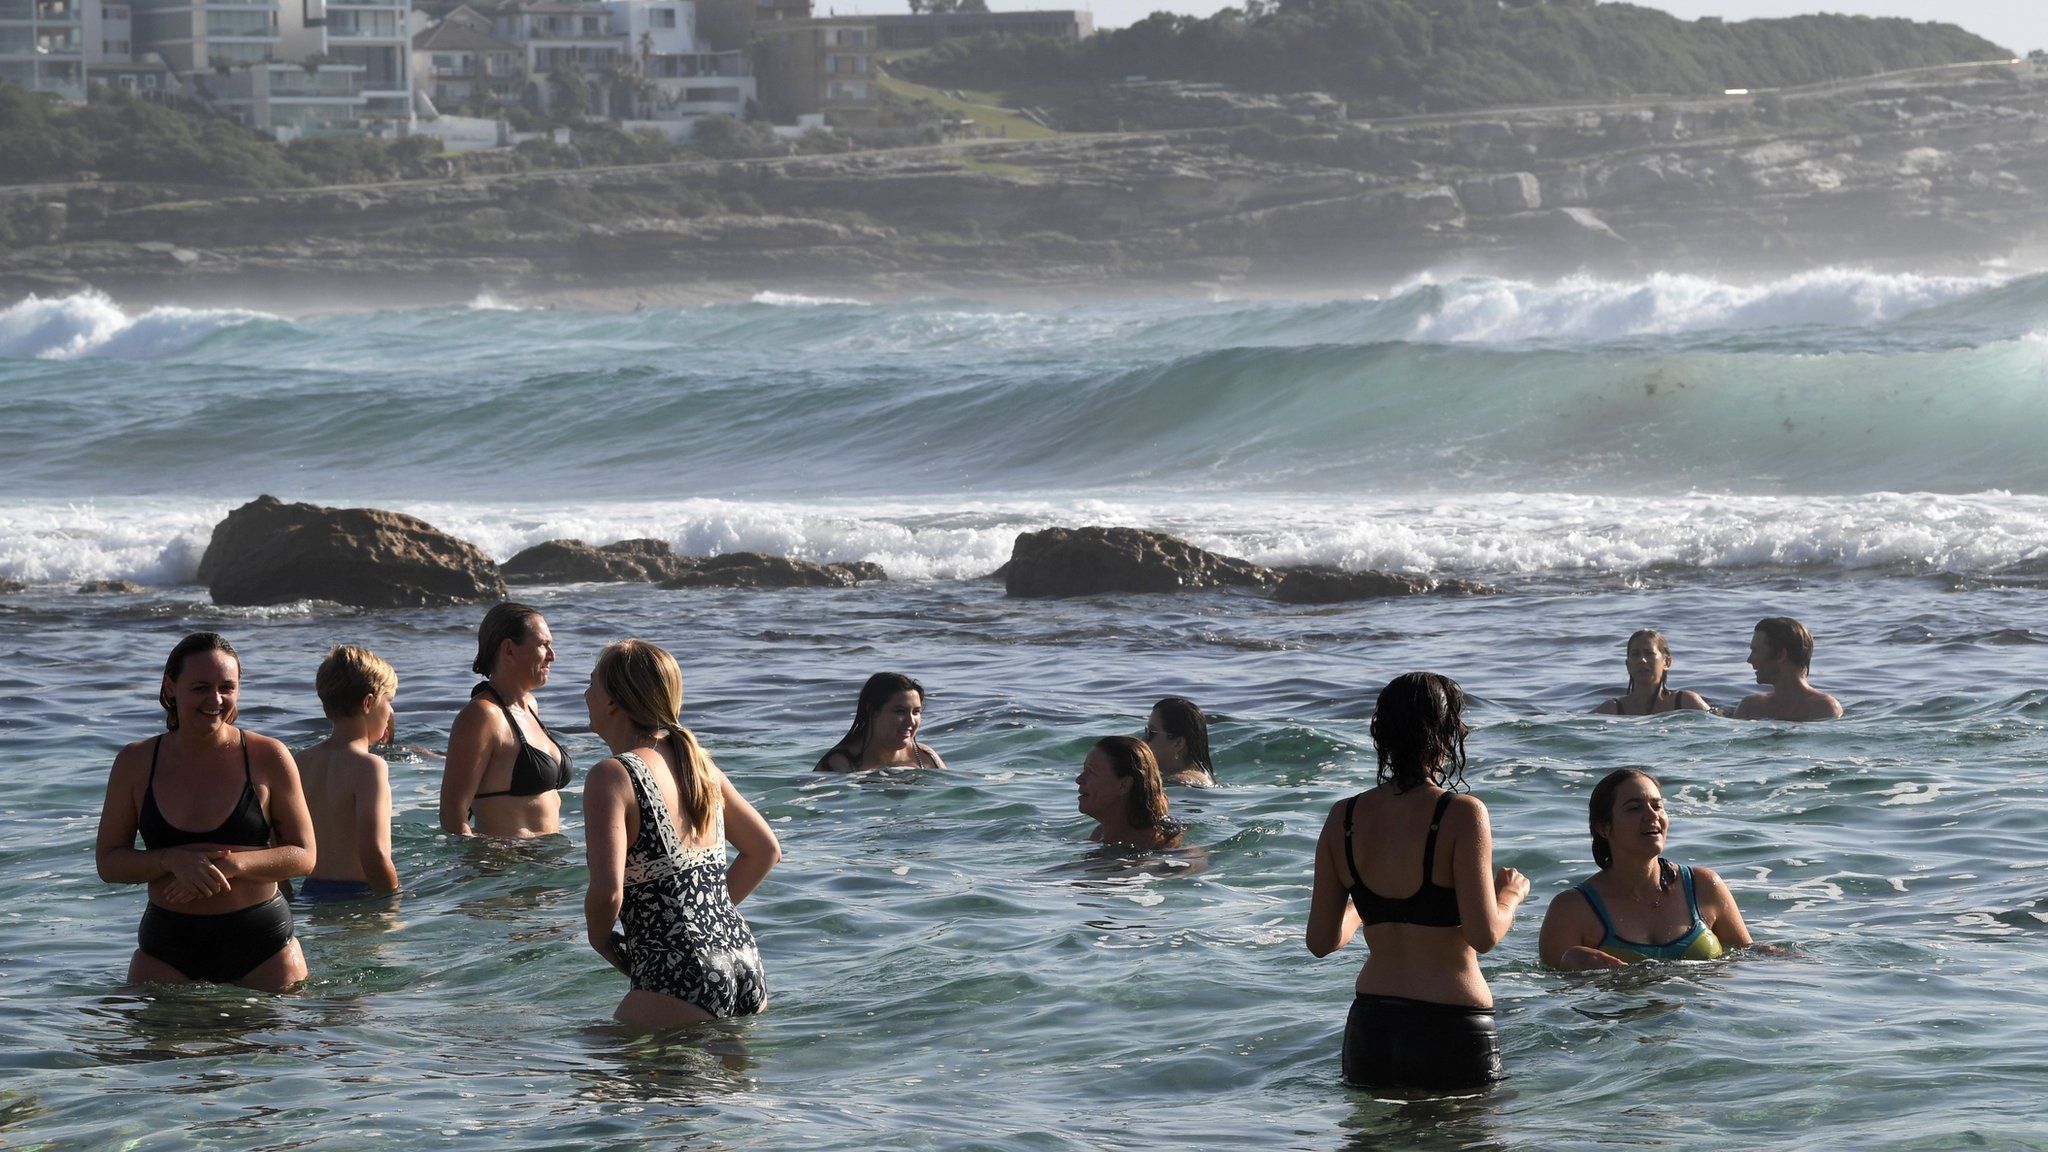 Beachgoers cool off at Bronte Beach in Sydney, New South Wales (NSW), Australia, 16 January 2019.